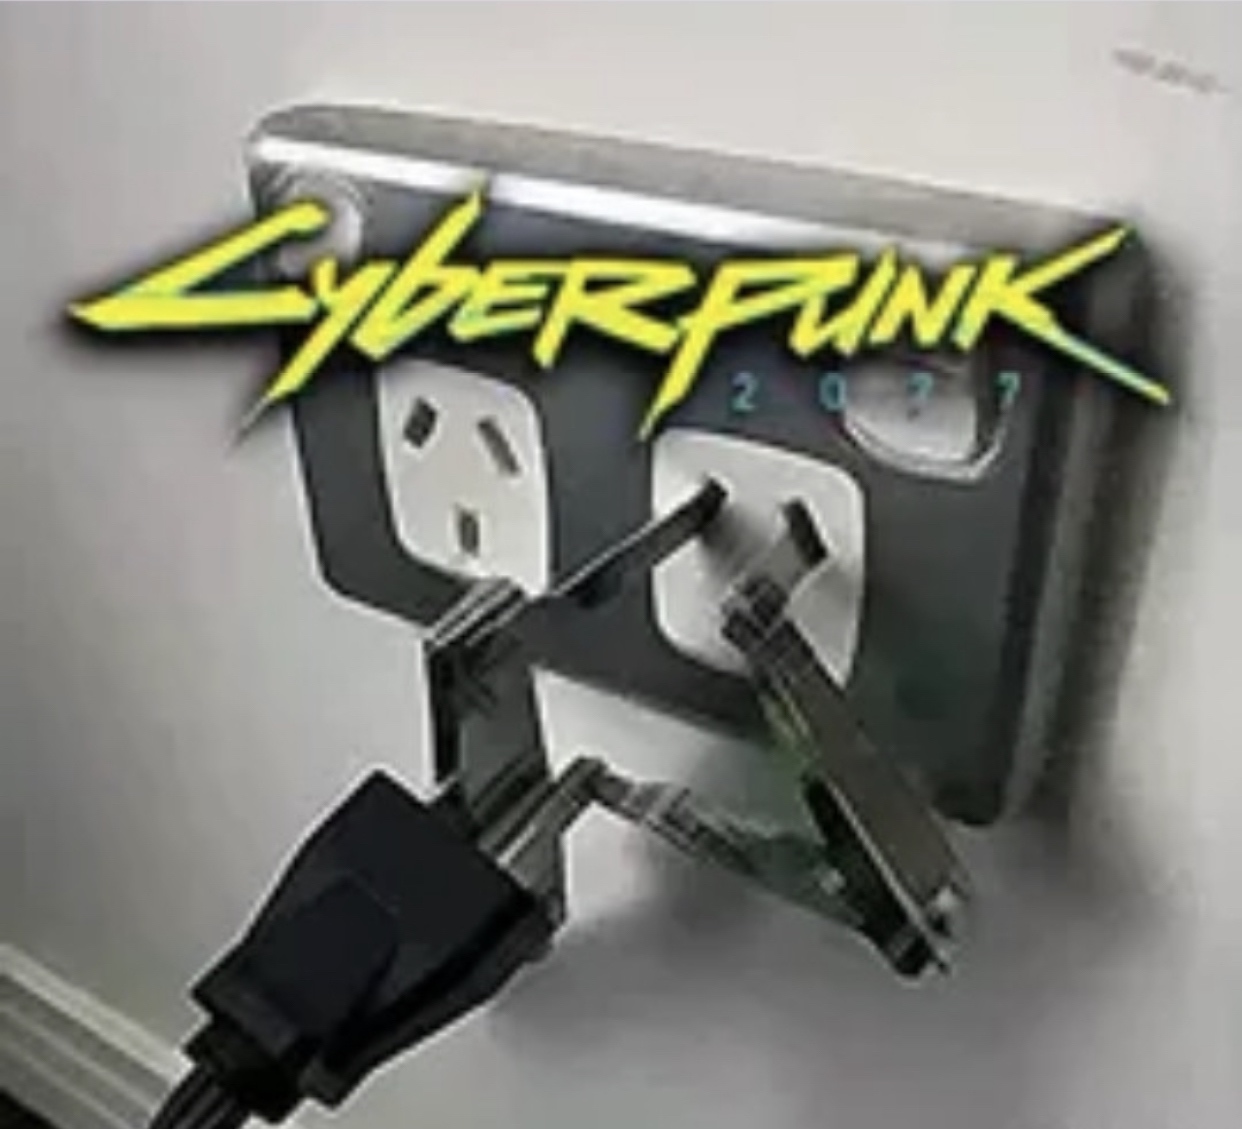 cyberpunk 2077 memes - Punk 2077 - using a U.S. plug on in a different type of outlet